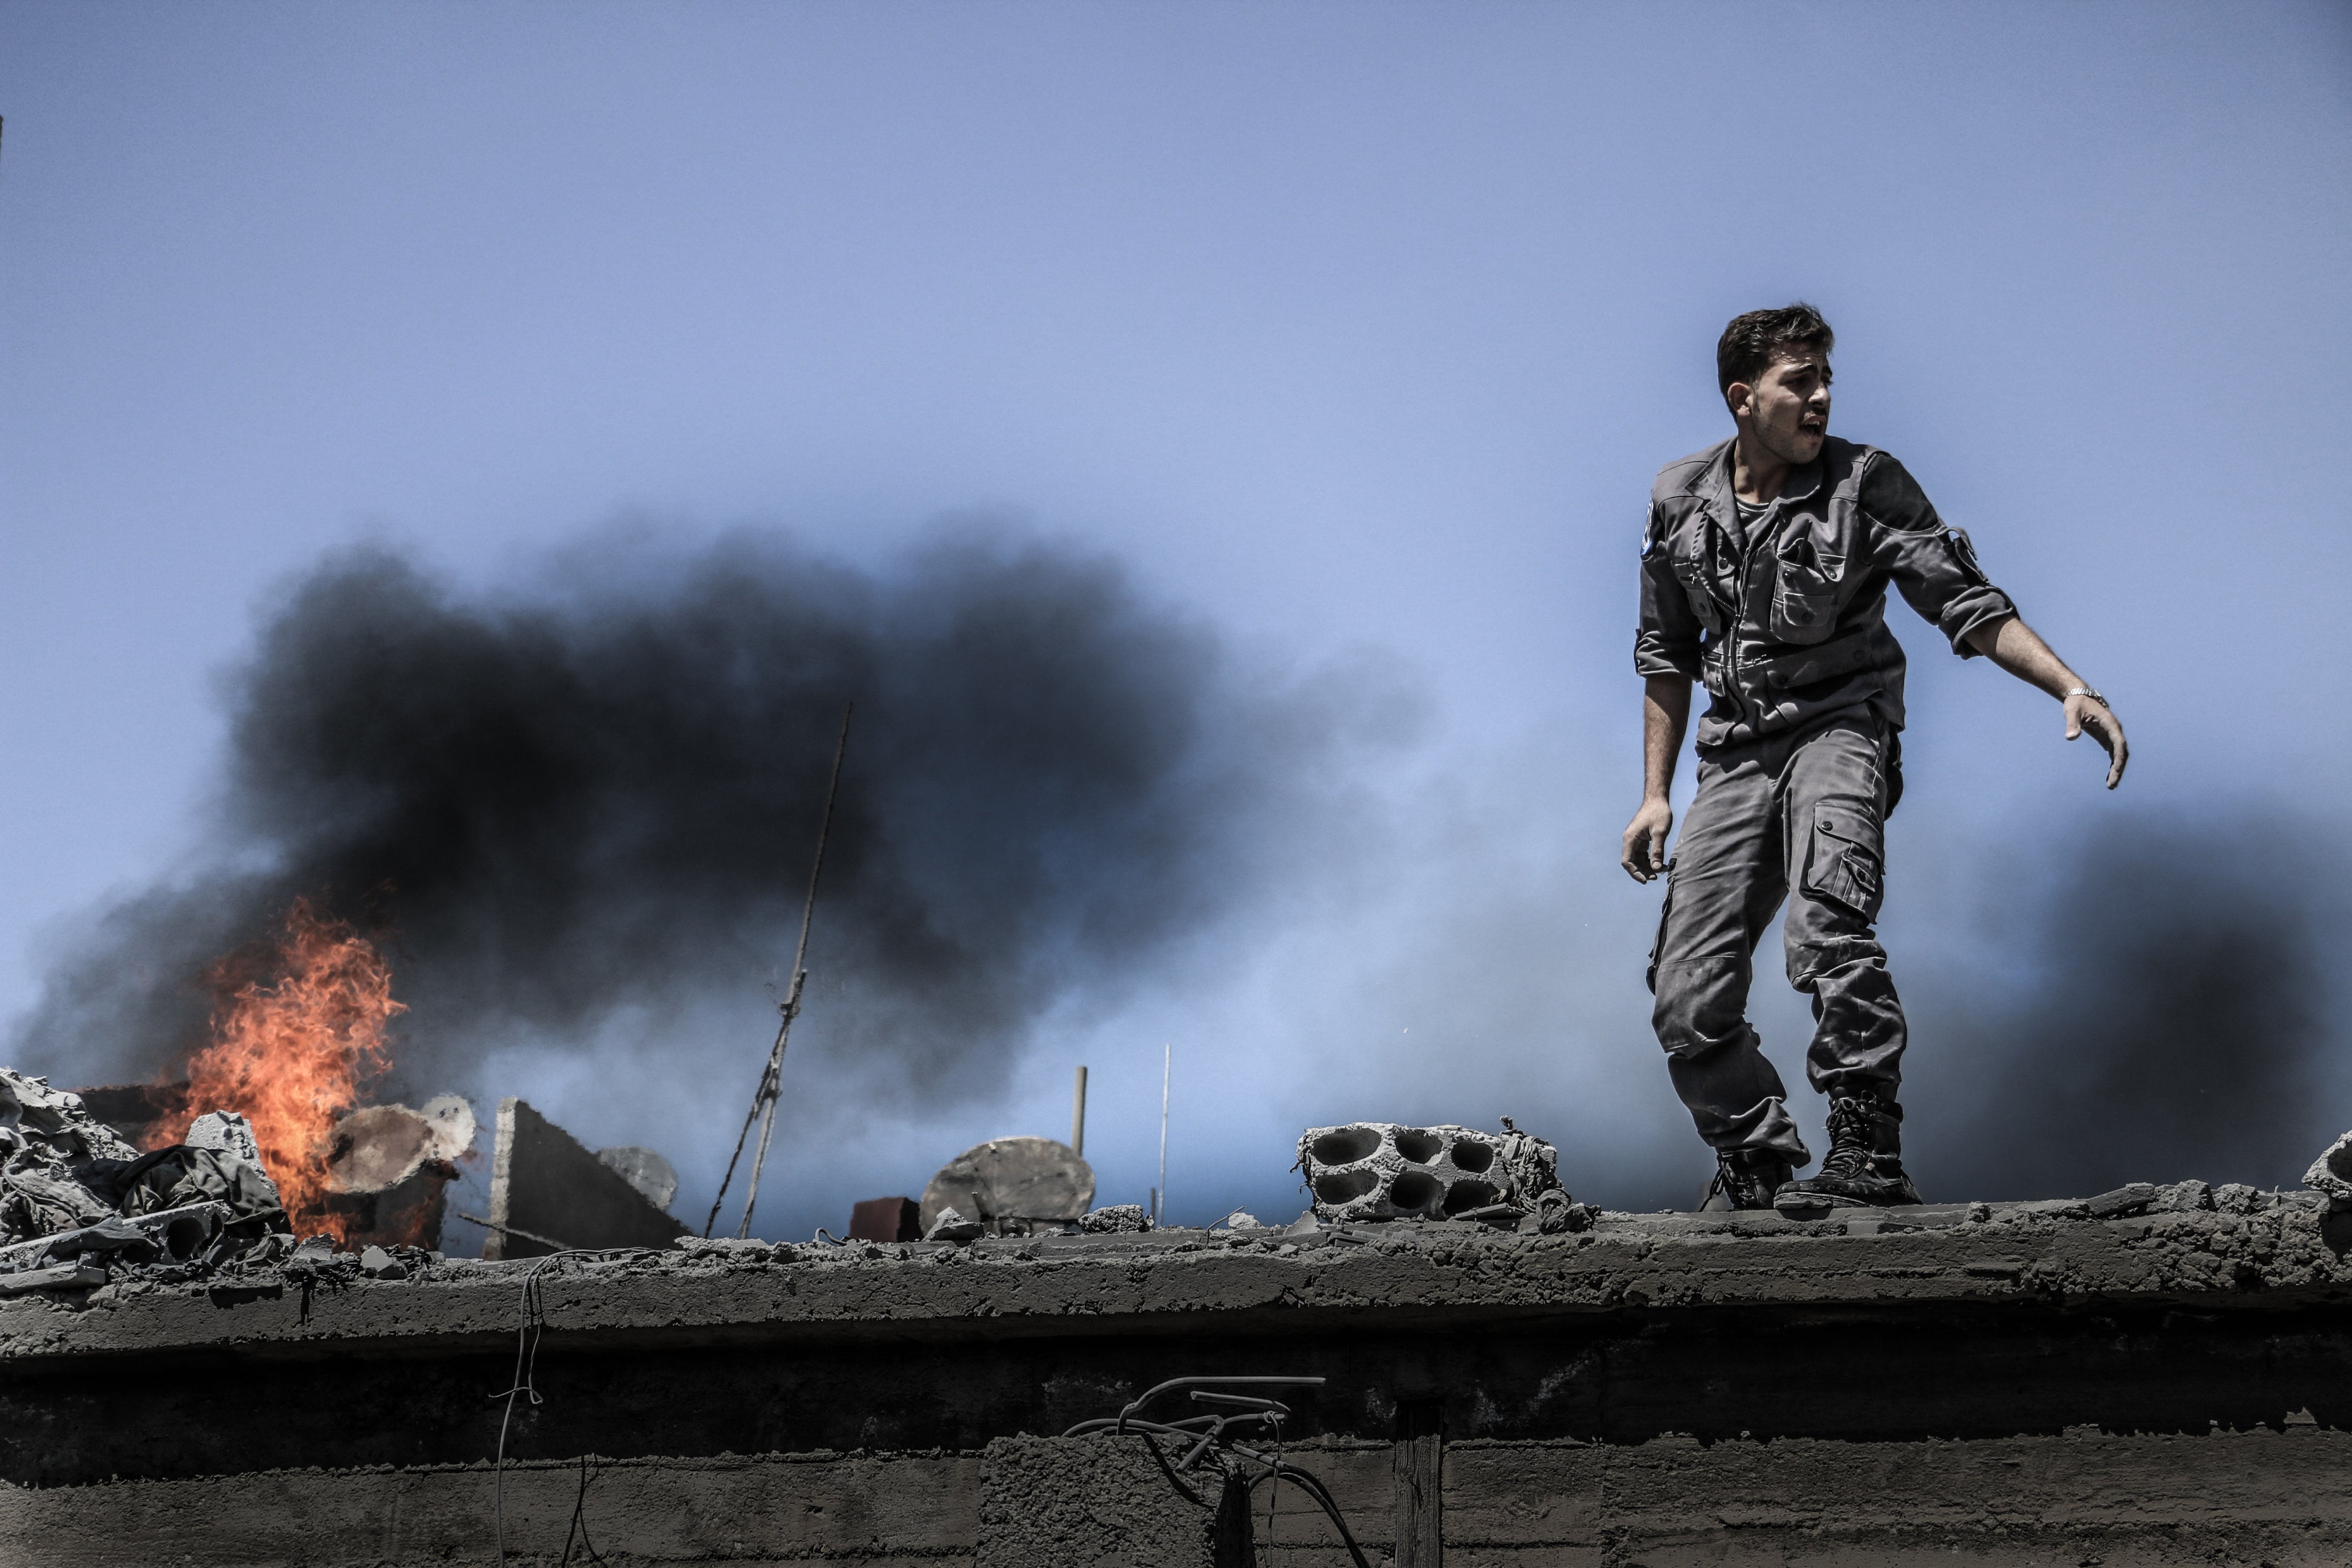 Civil defenses extinguish fires in a building destroyed in Arbin, Syria, on June 23, 2015. (Amer Almohipany—NurPhoto/AP)